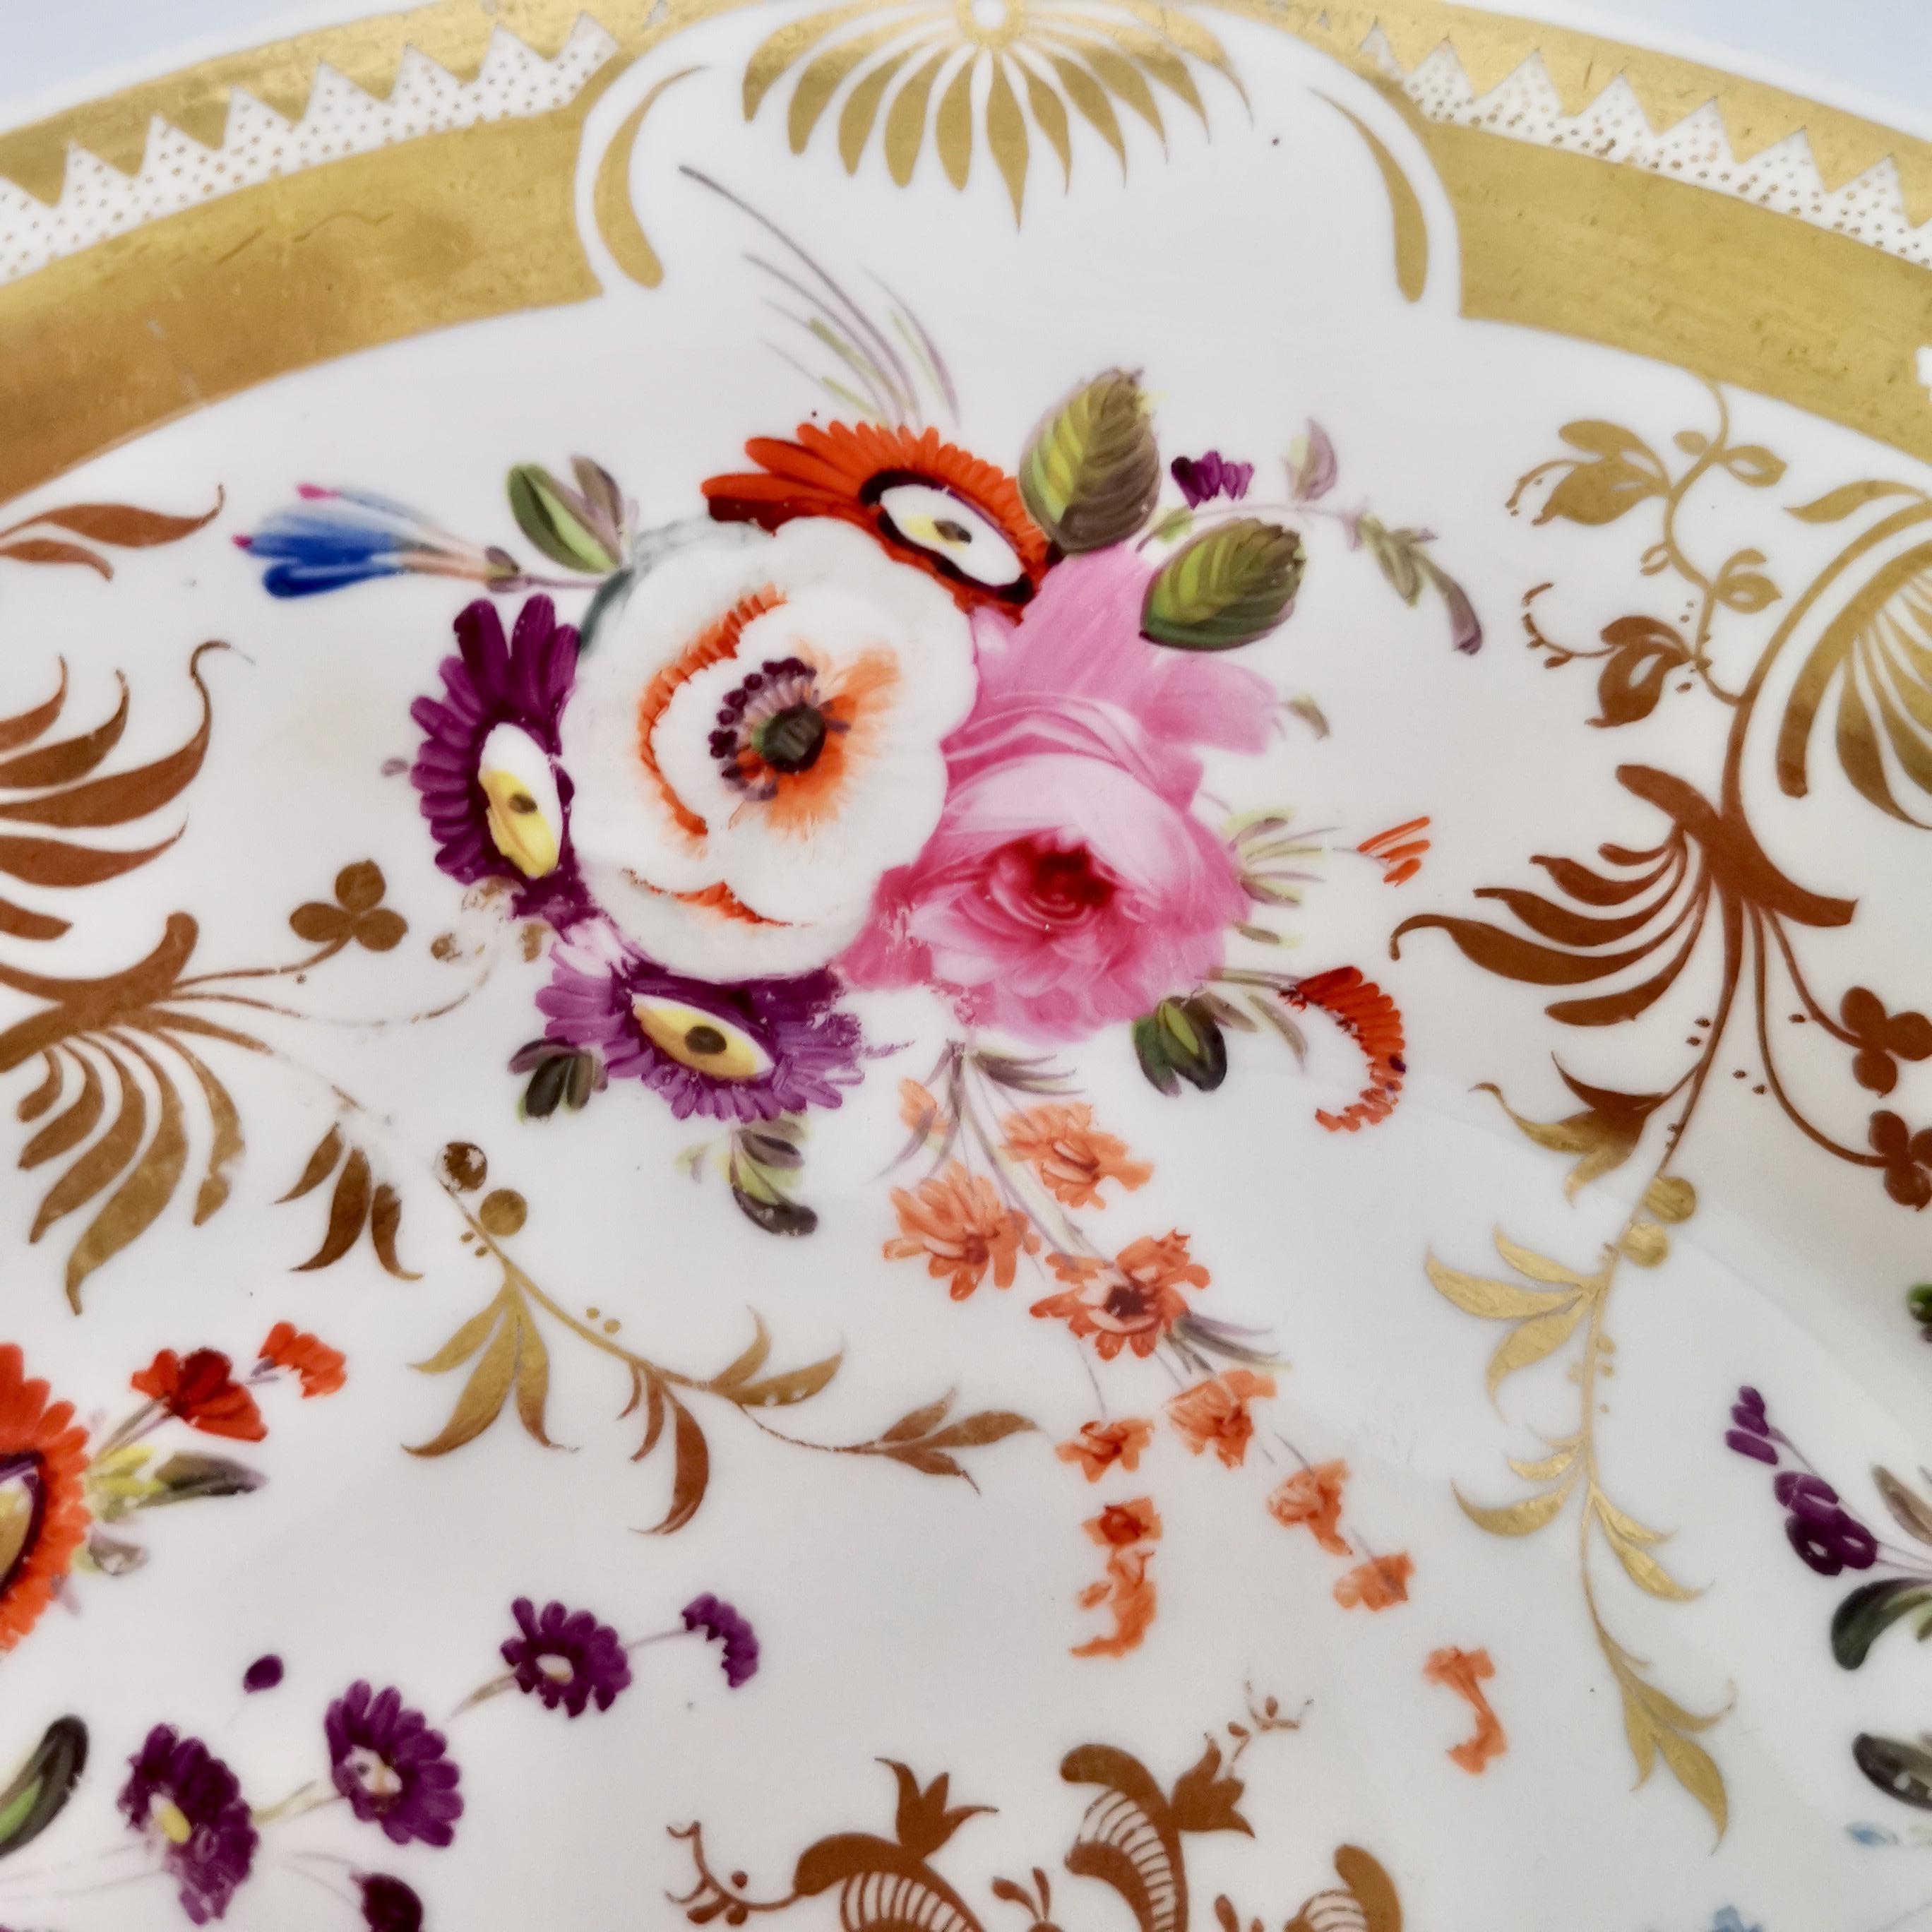 Hand-Painted Davenport Porcelain Plate, Gilt and Hand Painted Flowers, Regency ca 1820